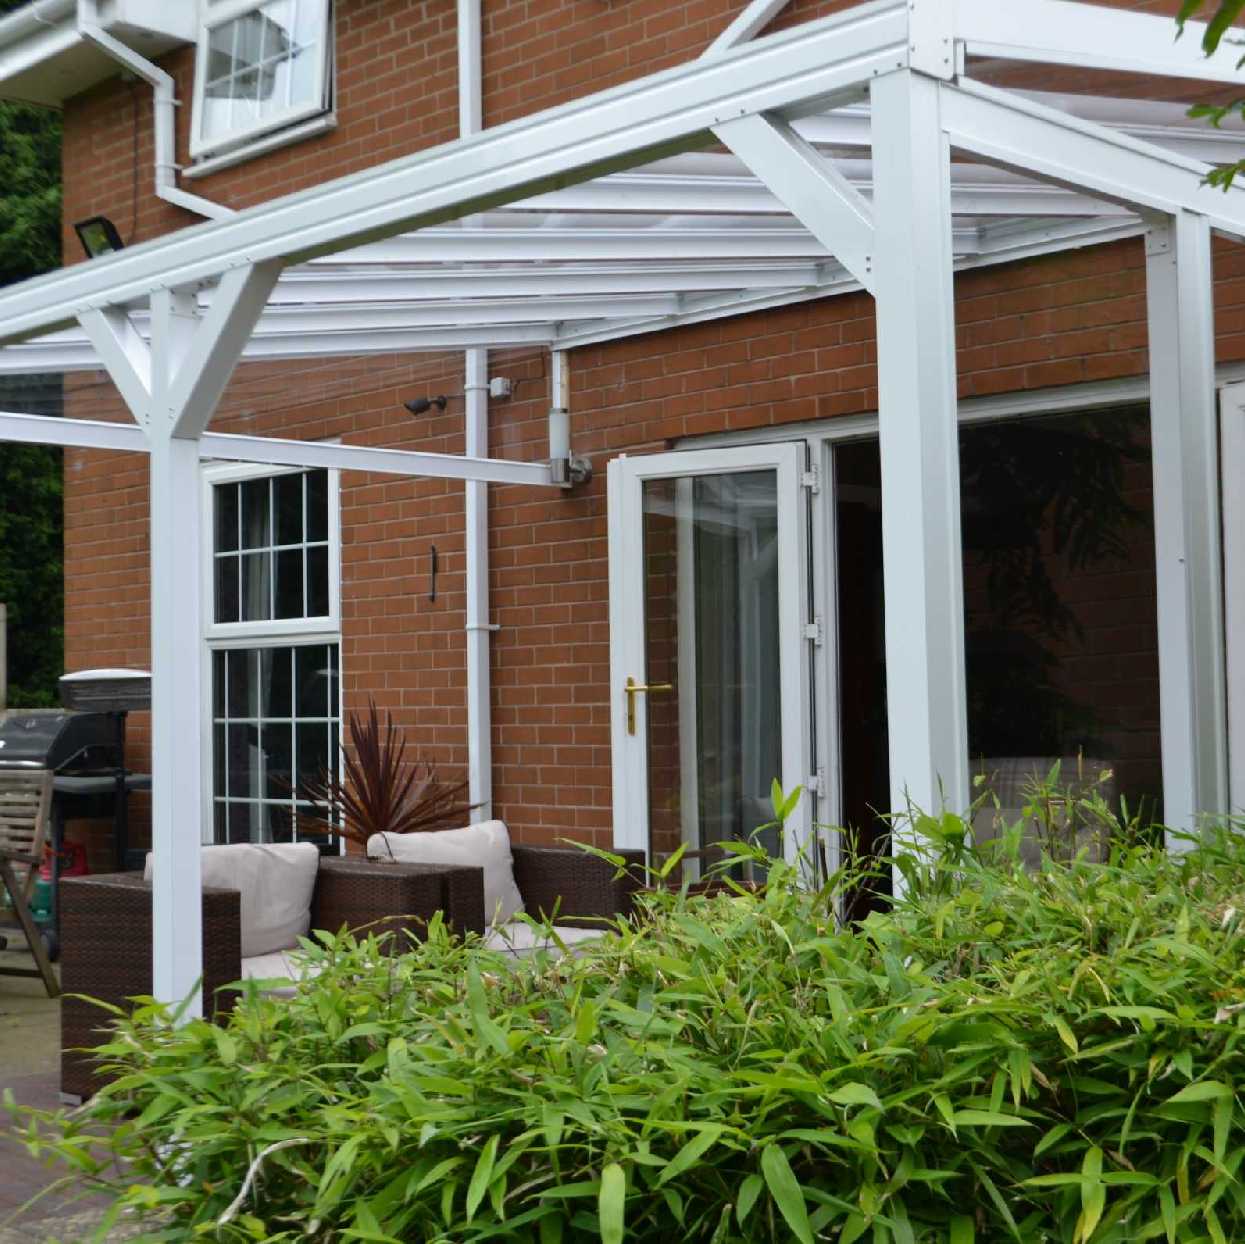 Omega Smart Lean-To Canopy, White with 6mm Glass Clear Plate Polycarbonate Glazing - 9.1m (W) x 1.5m (P), (5) Supporting Posts from Omega Build